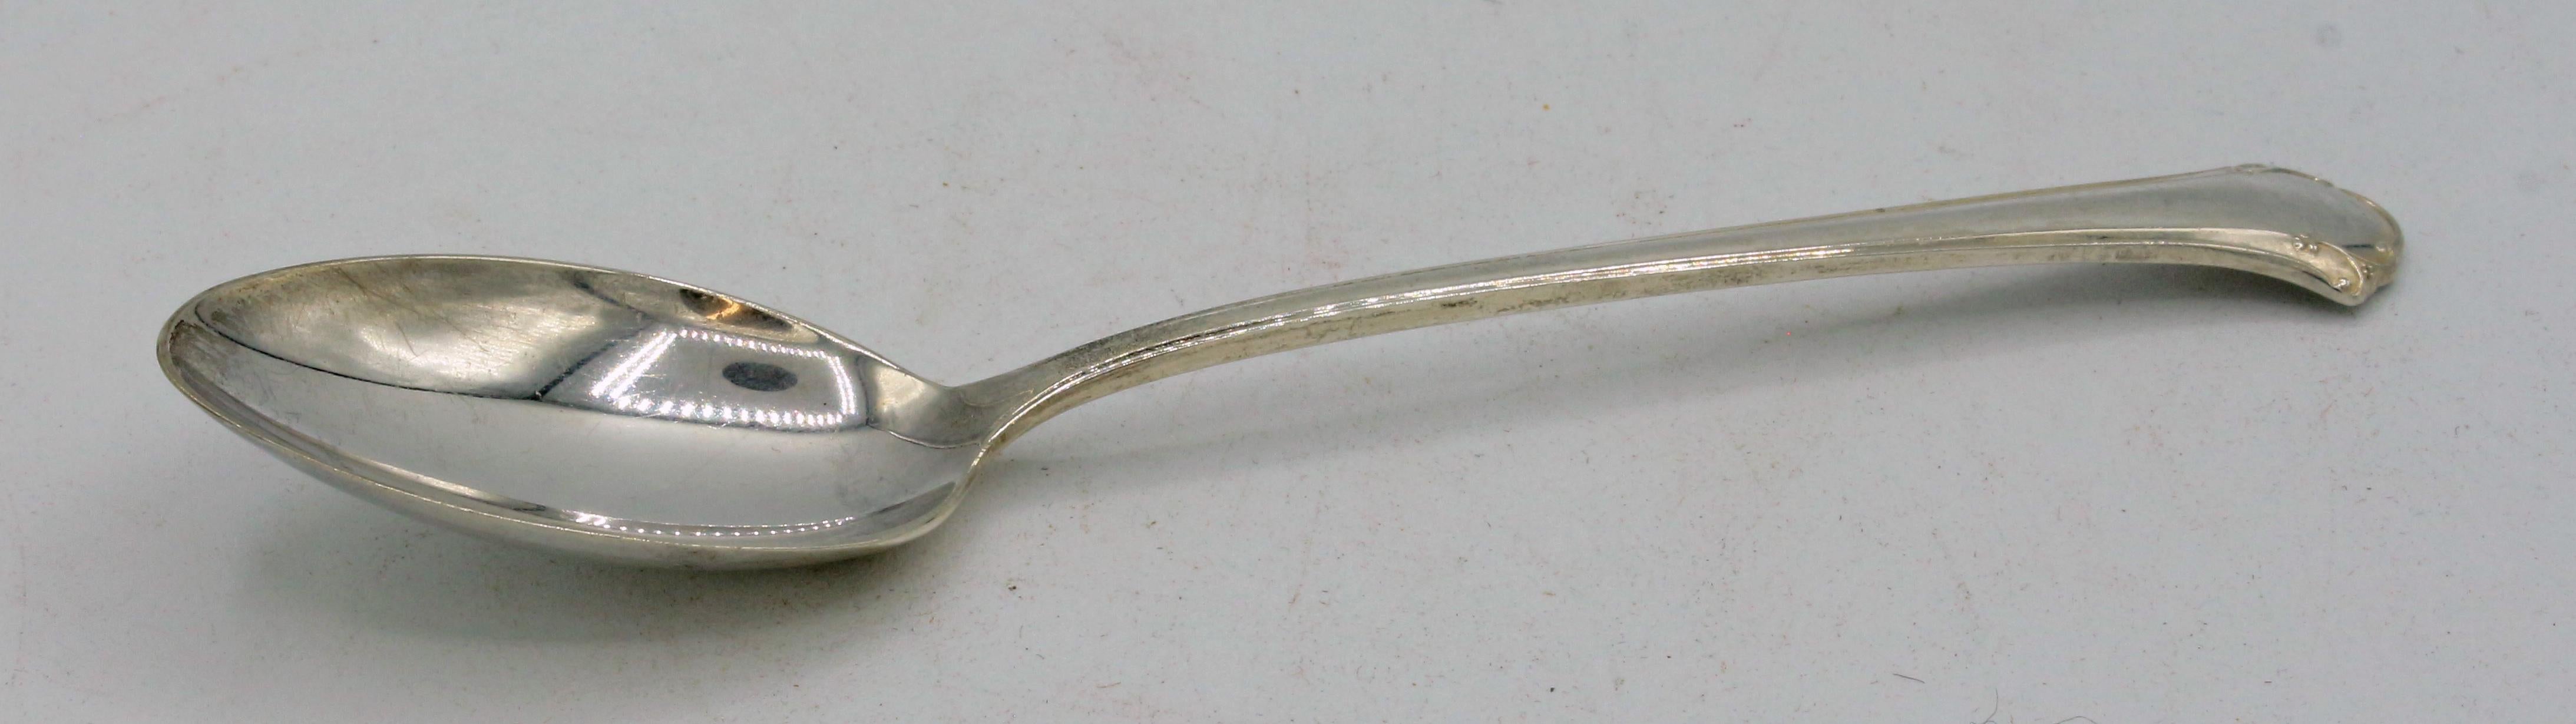 Mid-20th century set of 6 sterling teaspoons, Chippendale pattern by Towle of 1937. Never engraved. 5 troy oz. 6